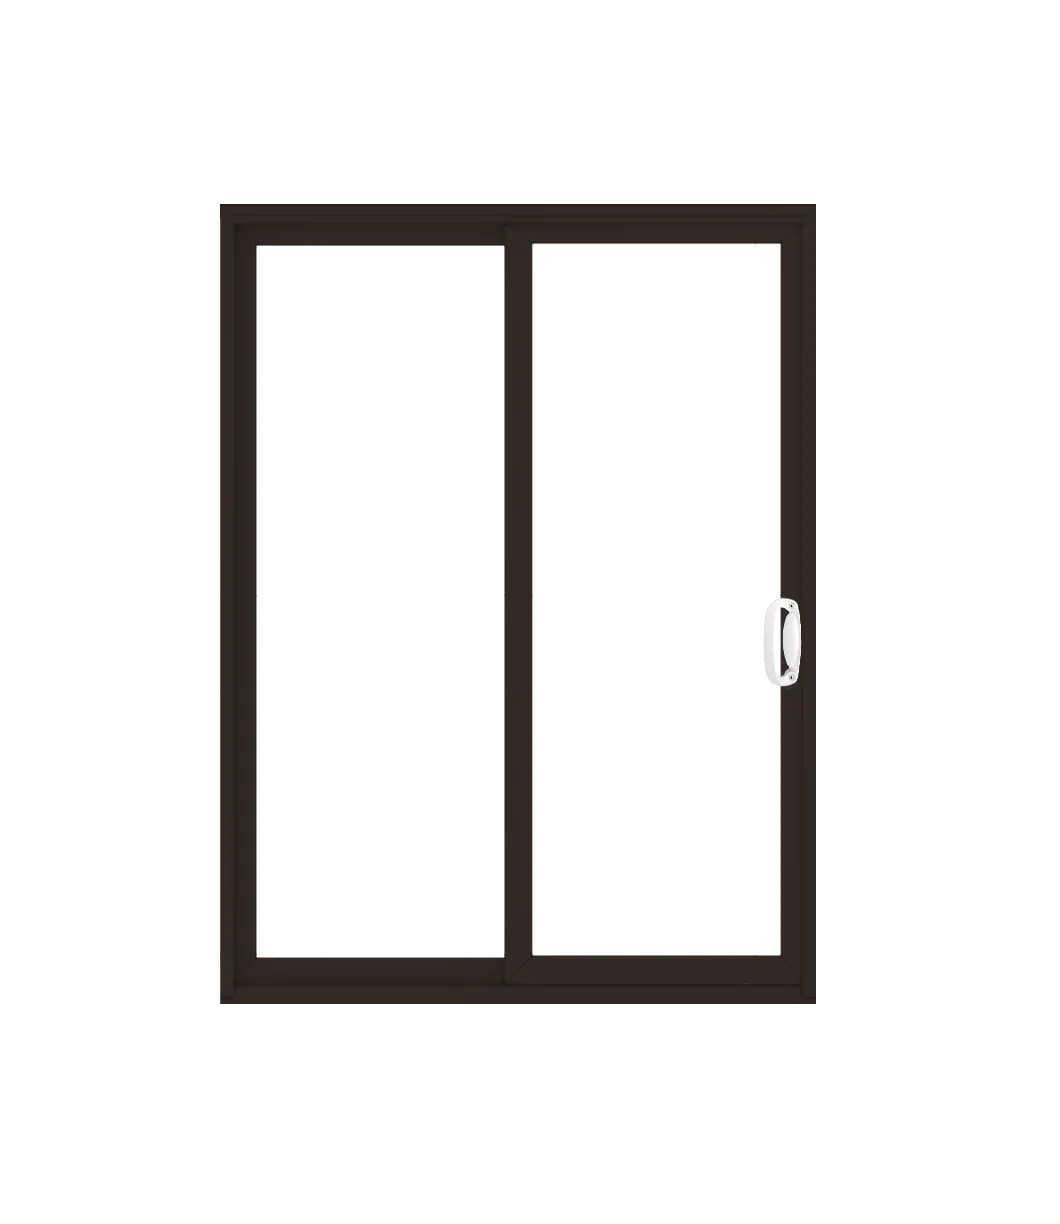 ANDERSEN PS5 200 Series Permashield 59-1/4" X 79-1/2" Sliding/Gliding Dual Pane Or Triple Pane Low-E Tempered Argon Fill Stainless Glass 2 Panel Patio Door Grilles/Screen Options